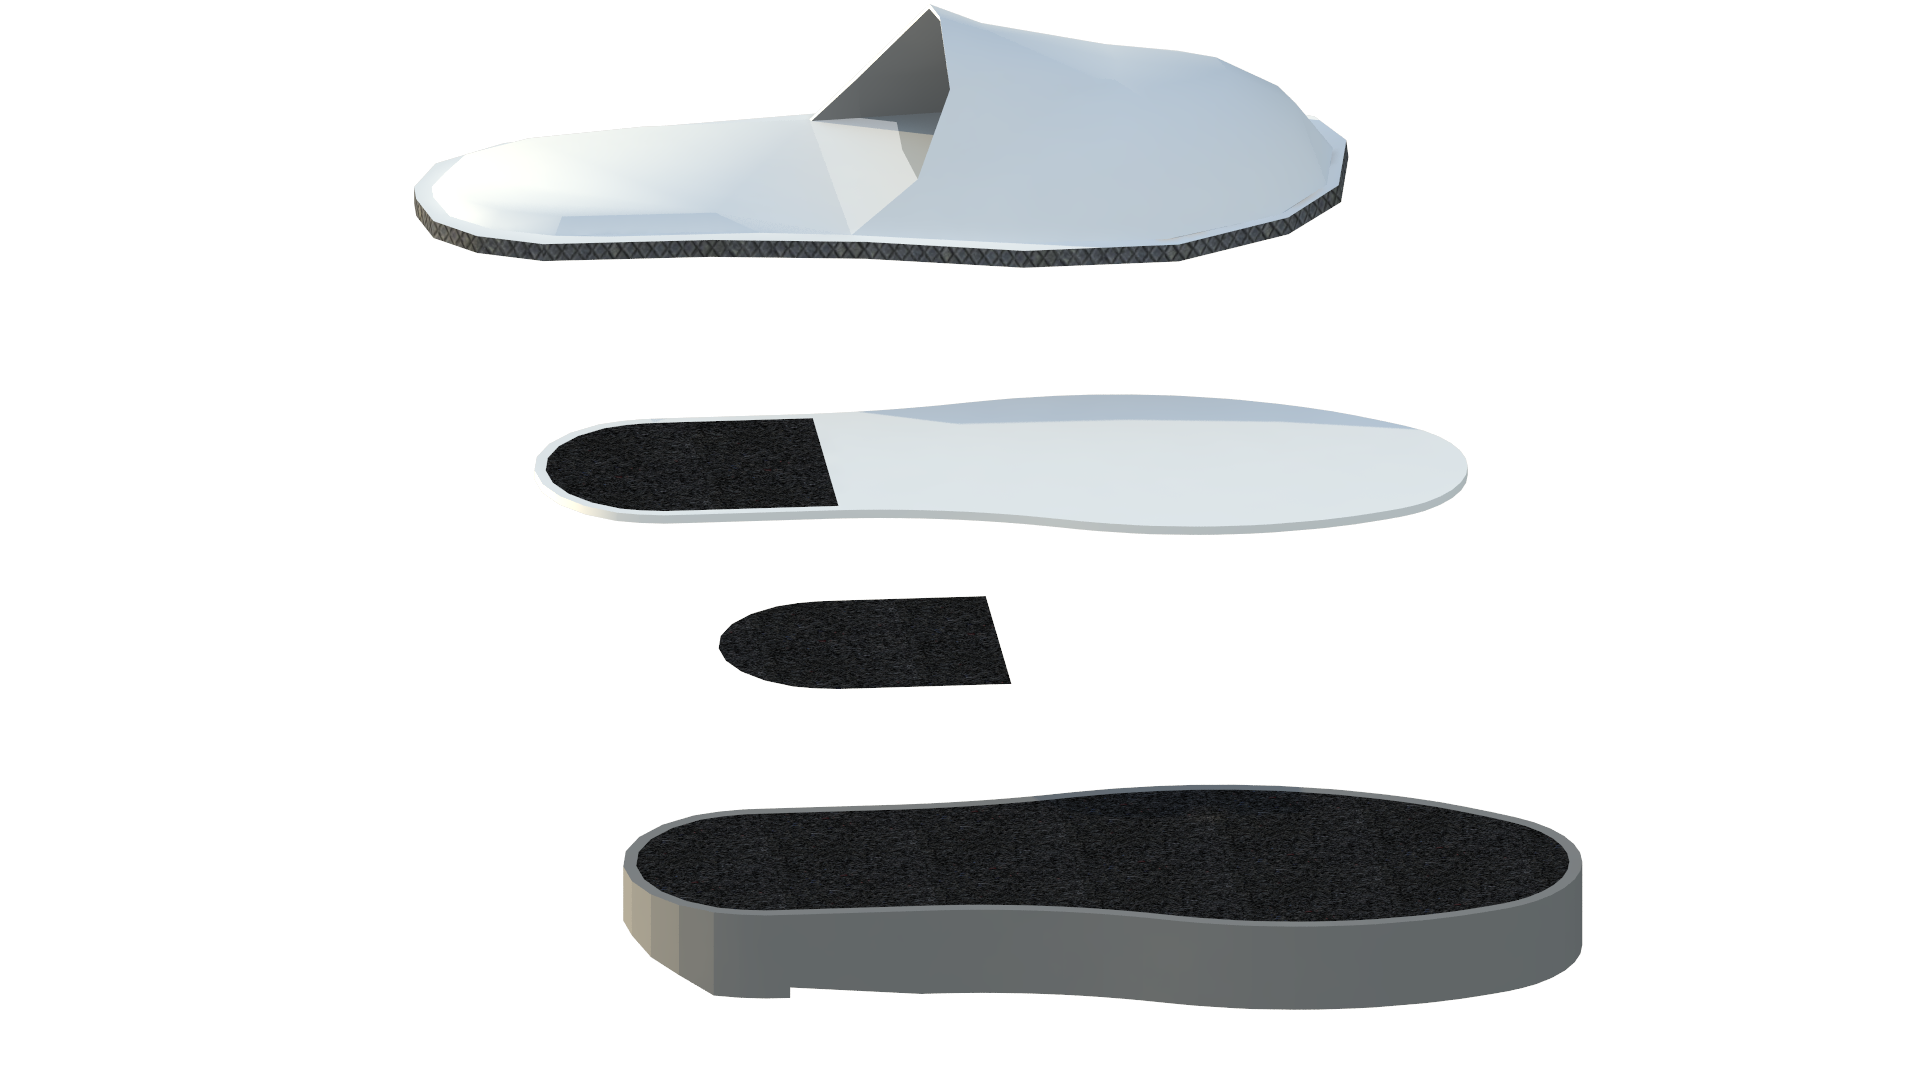 This shoe has a velcro patch on it that allows the user to replace the sole of the shoe with several different styles, including a flat bottom, a wedge bottom, and a heel.